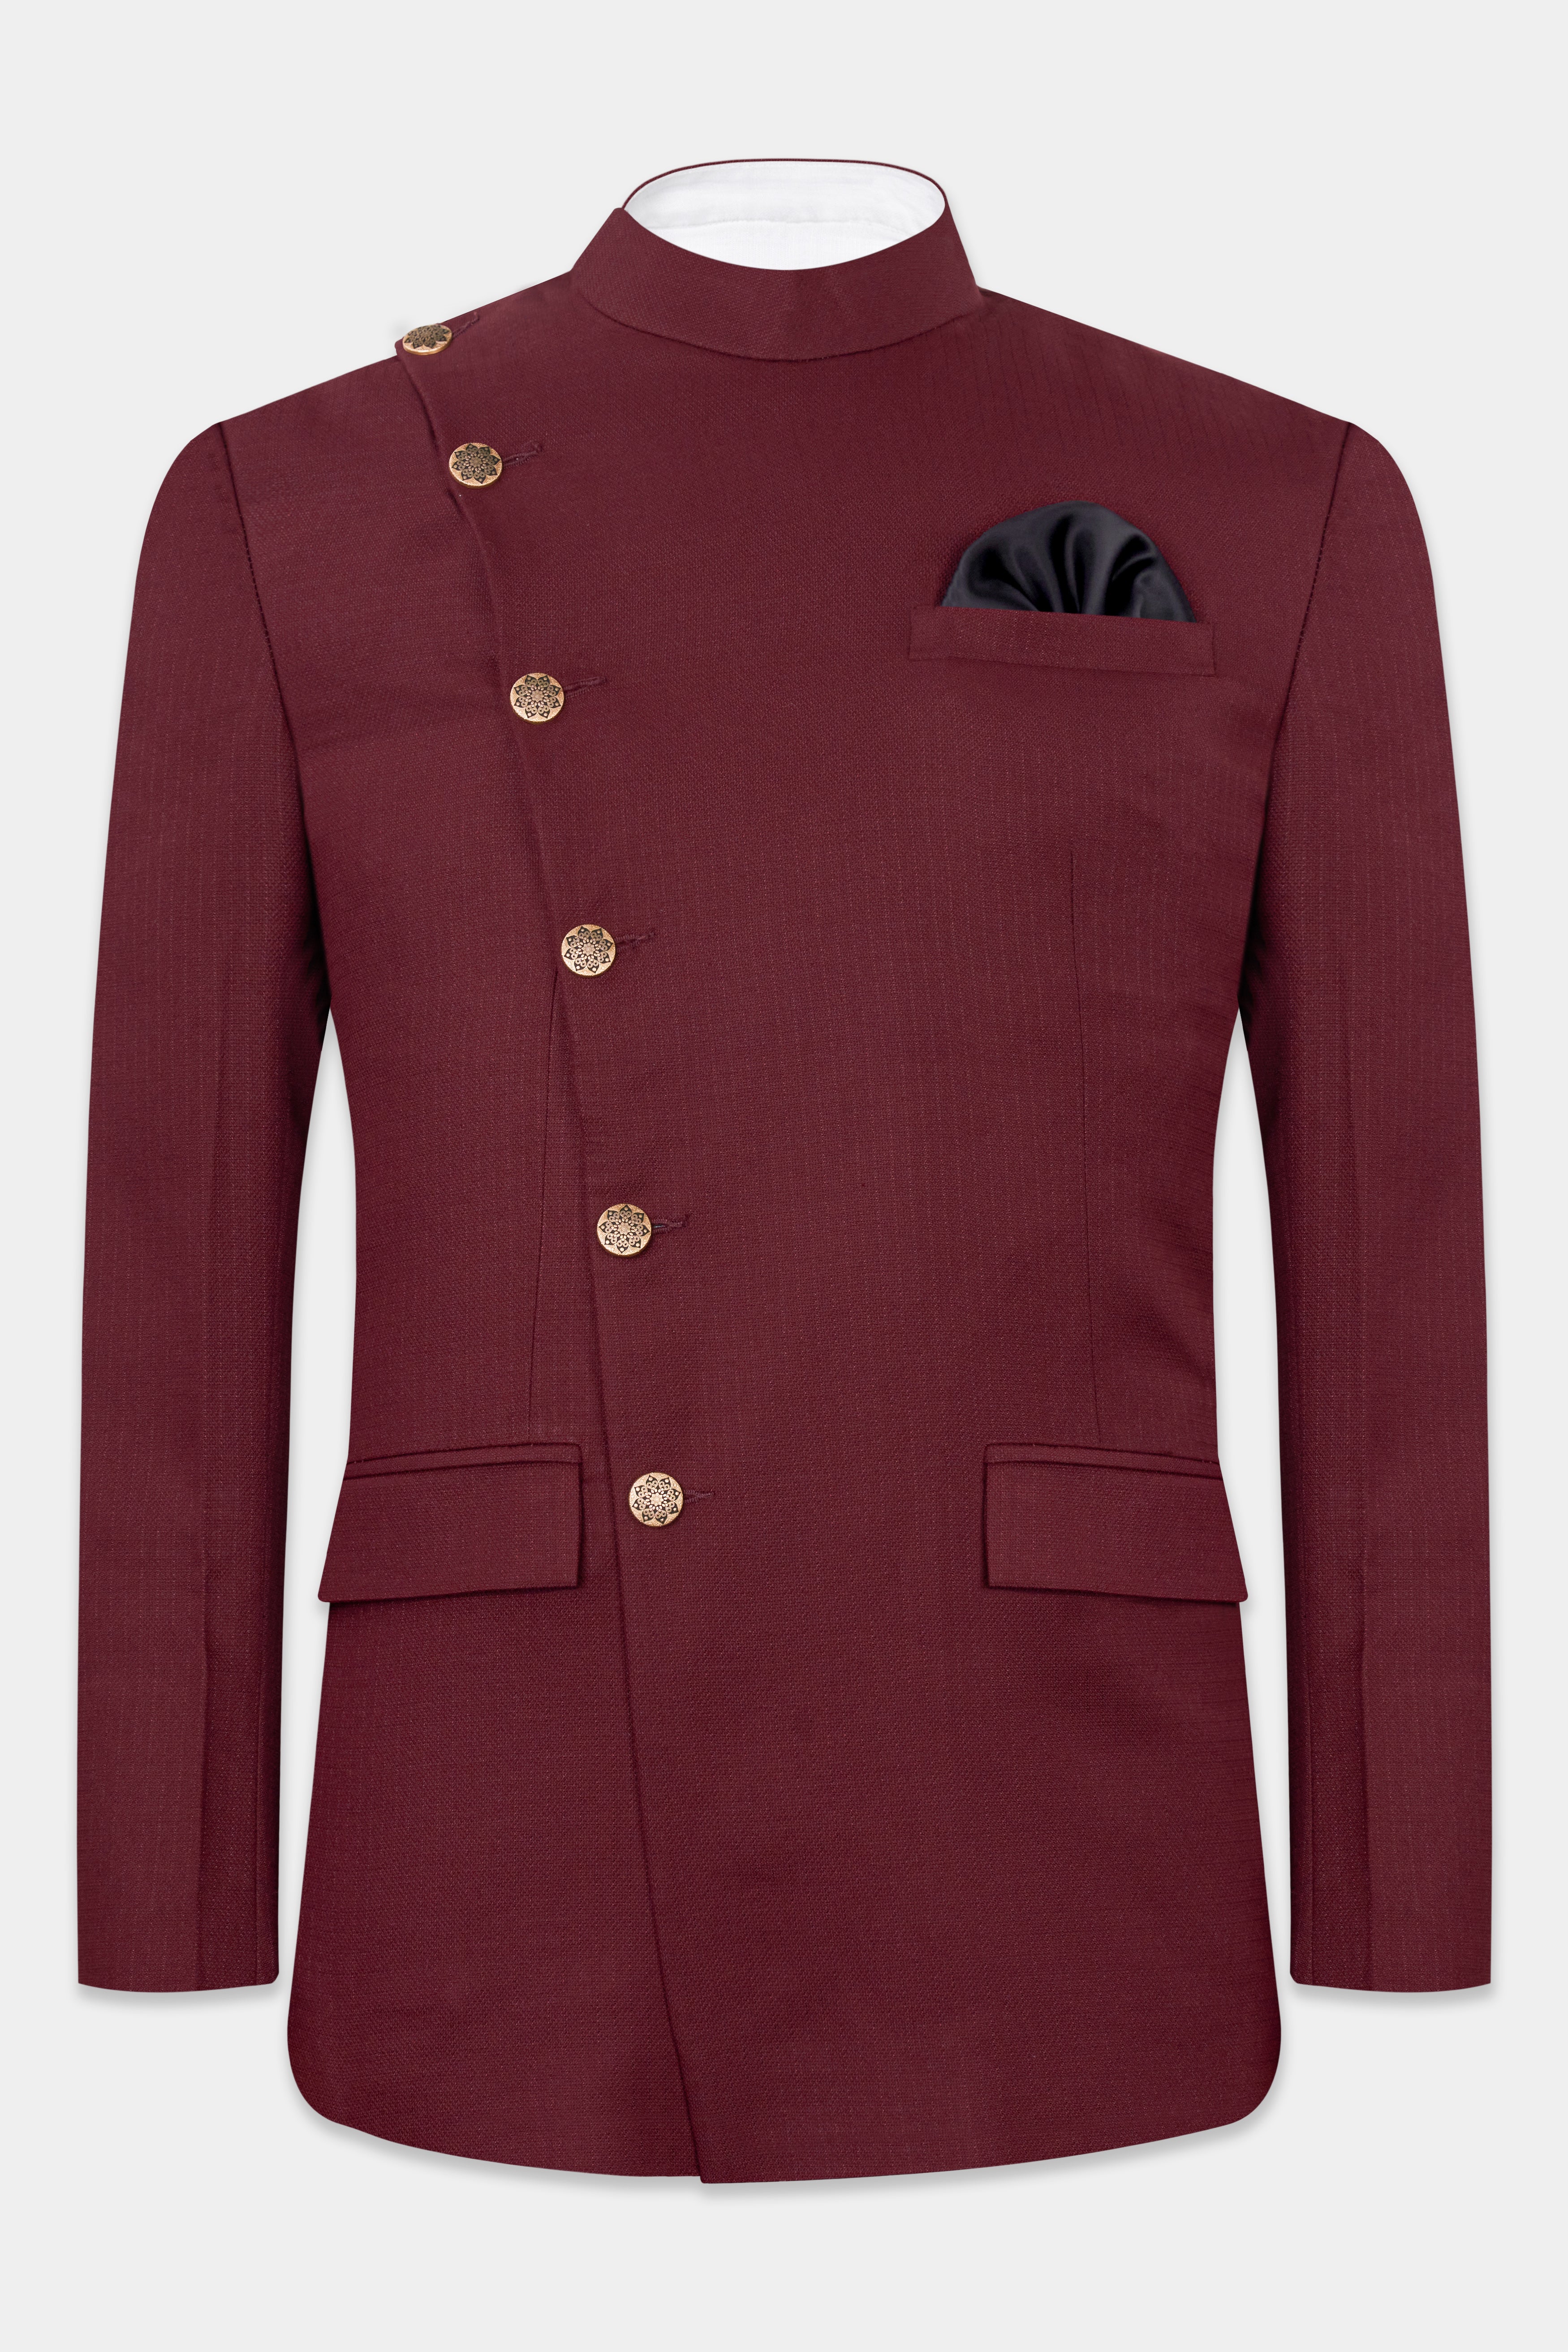 Maroon Dobby Textured Cross Placket Bandhgala Suit